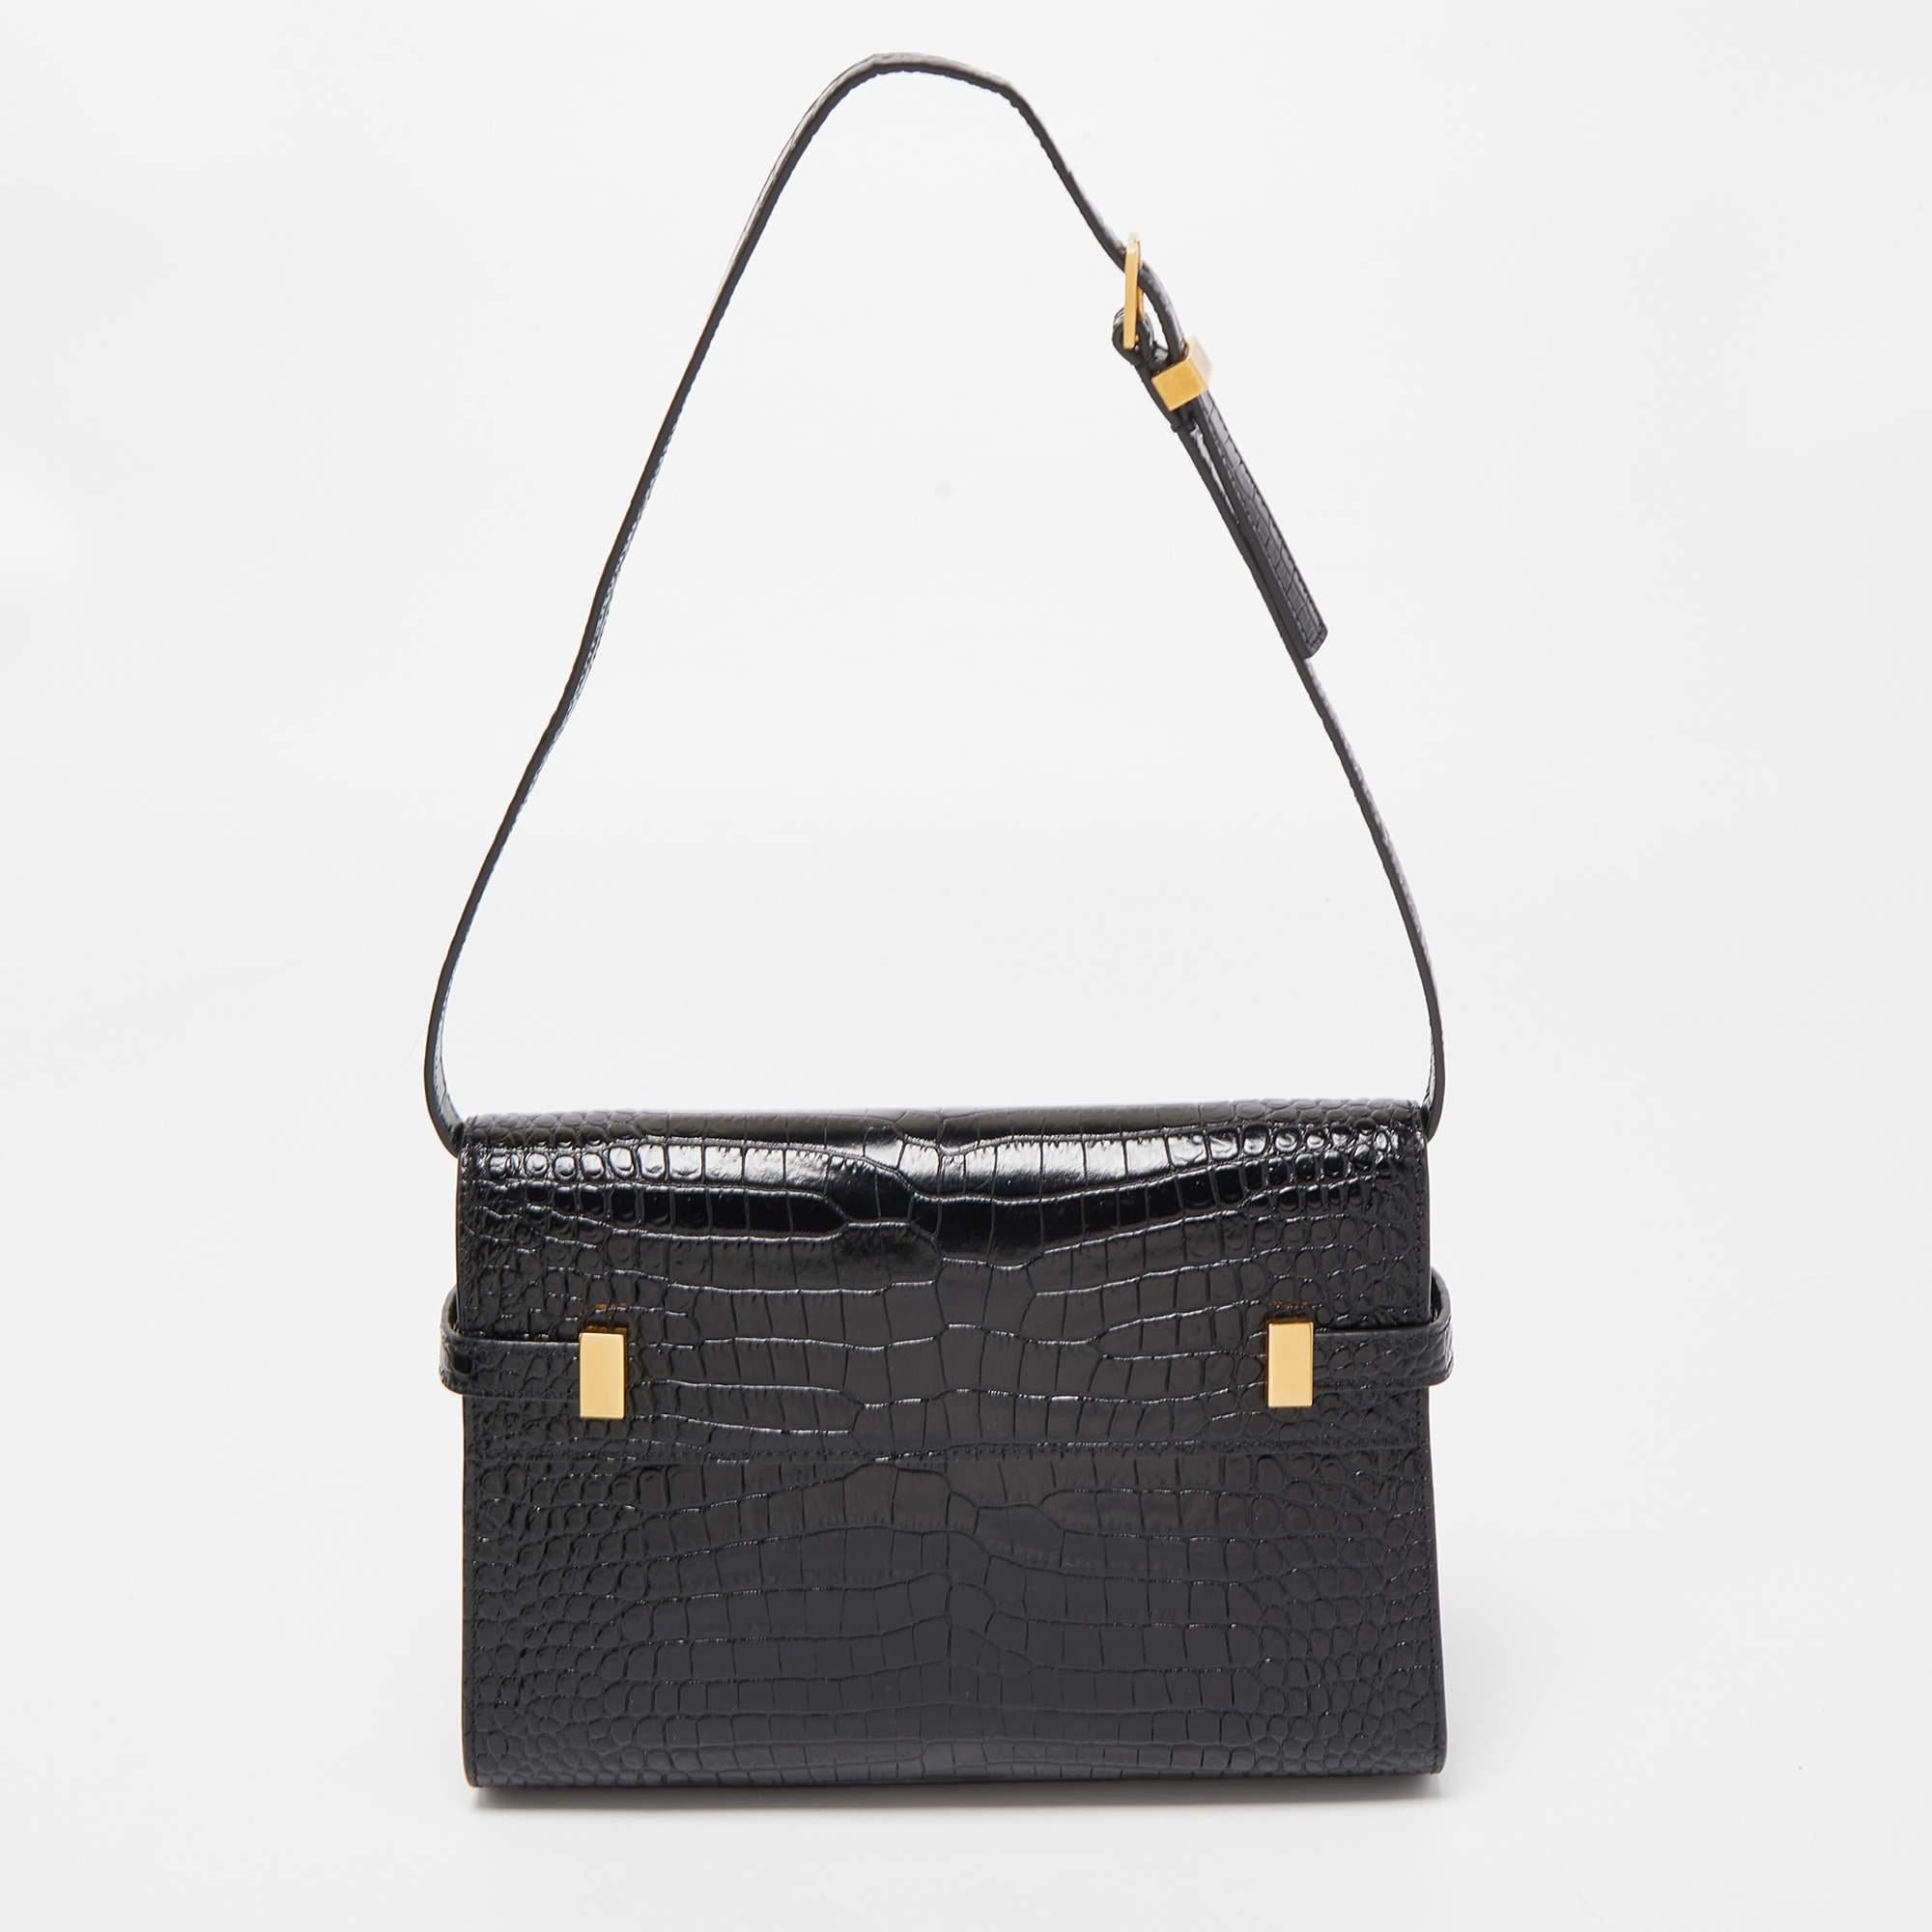 Structured, sophisticated, and stylish are some words that describe this Saint Laurent shoulder bag! Crafted from the best quality material, the creation is adorned with the label's signature appeal and equipped with a well-spaced interior. Carry it